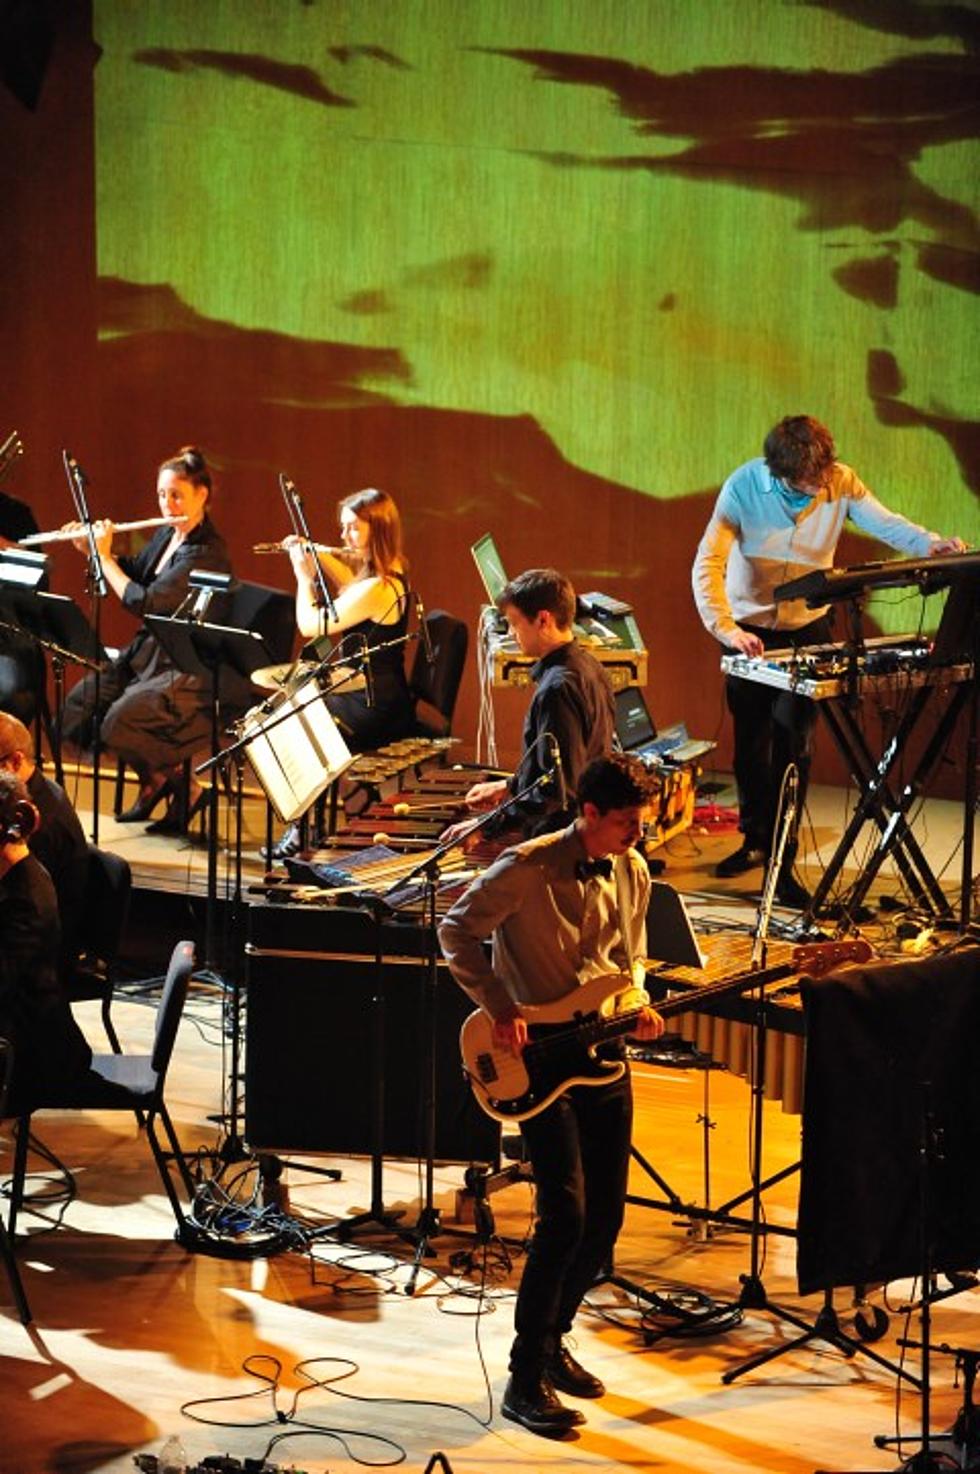 Efterklang celebrated &#8216;Piramida&#8217; at the Met w/ Wordless Music Orchestra (pics), doing two more events in NYC this week